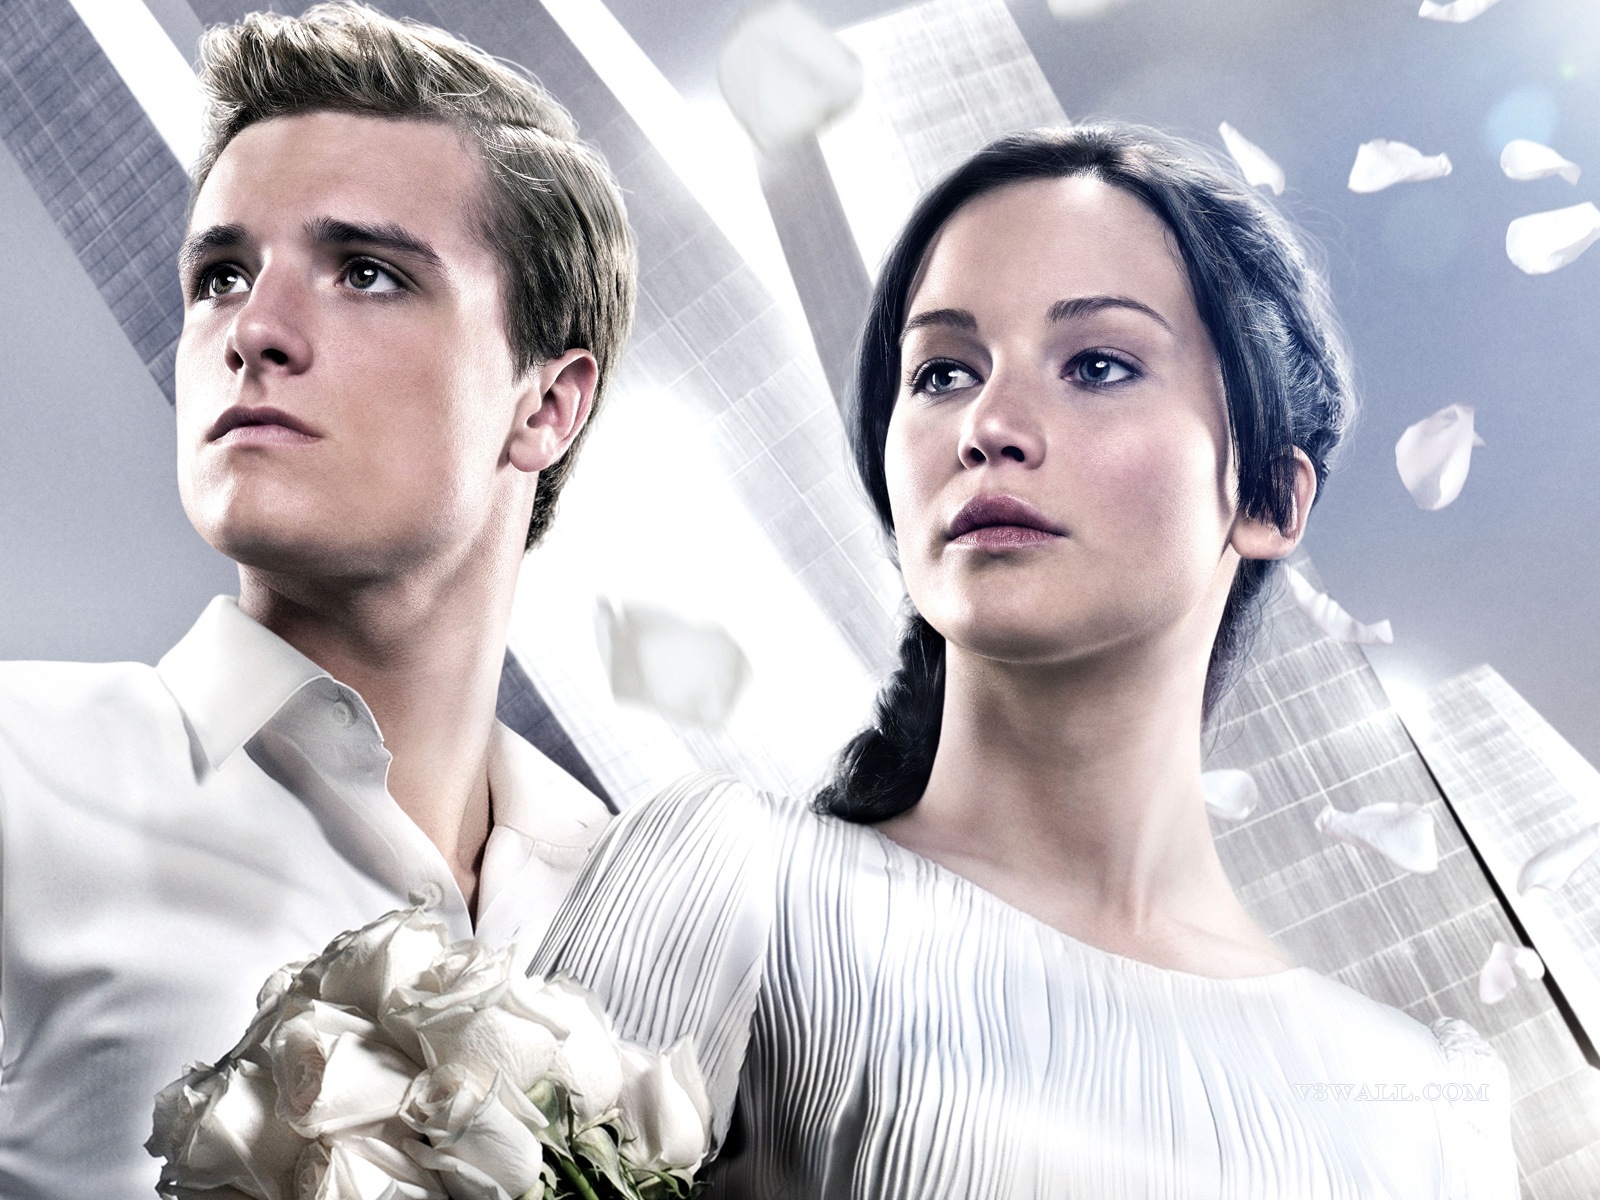 The Hunger Games: Catching Fire wallpapers HD #1 - 1600x1200